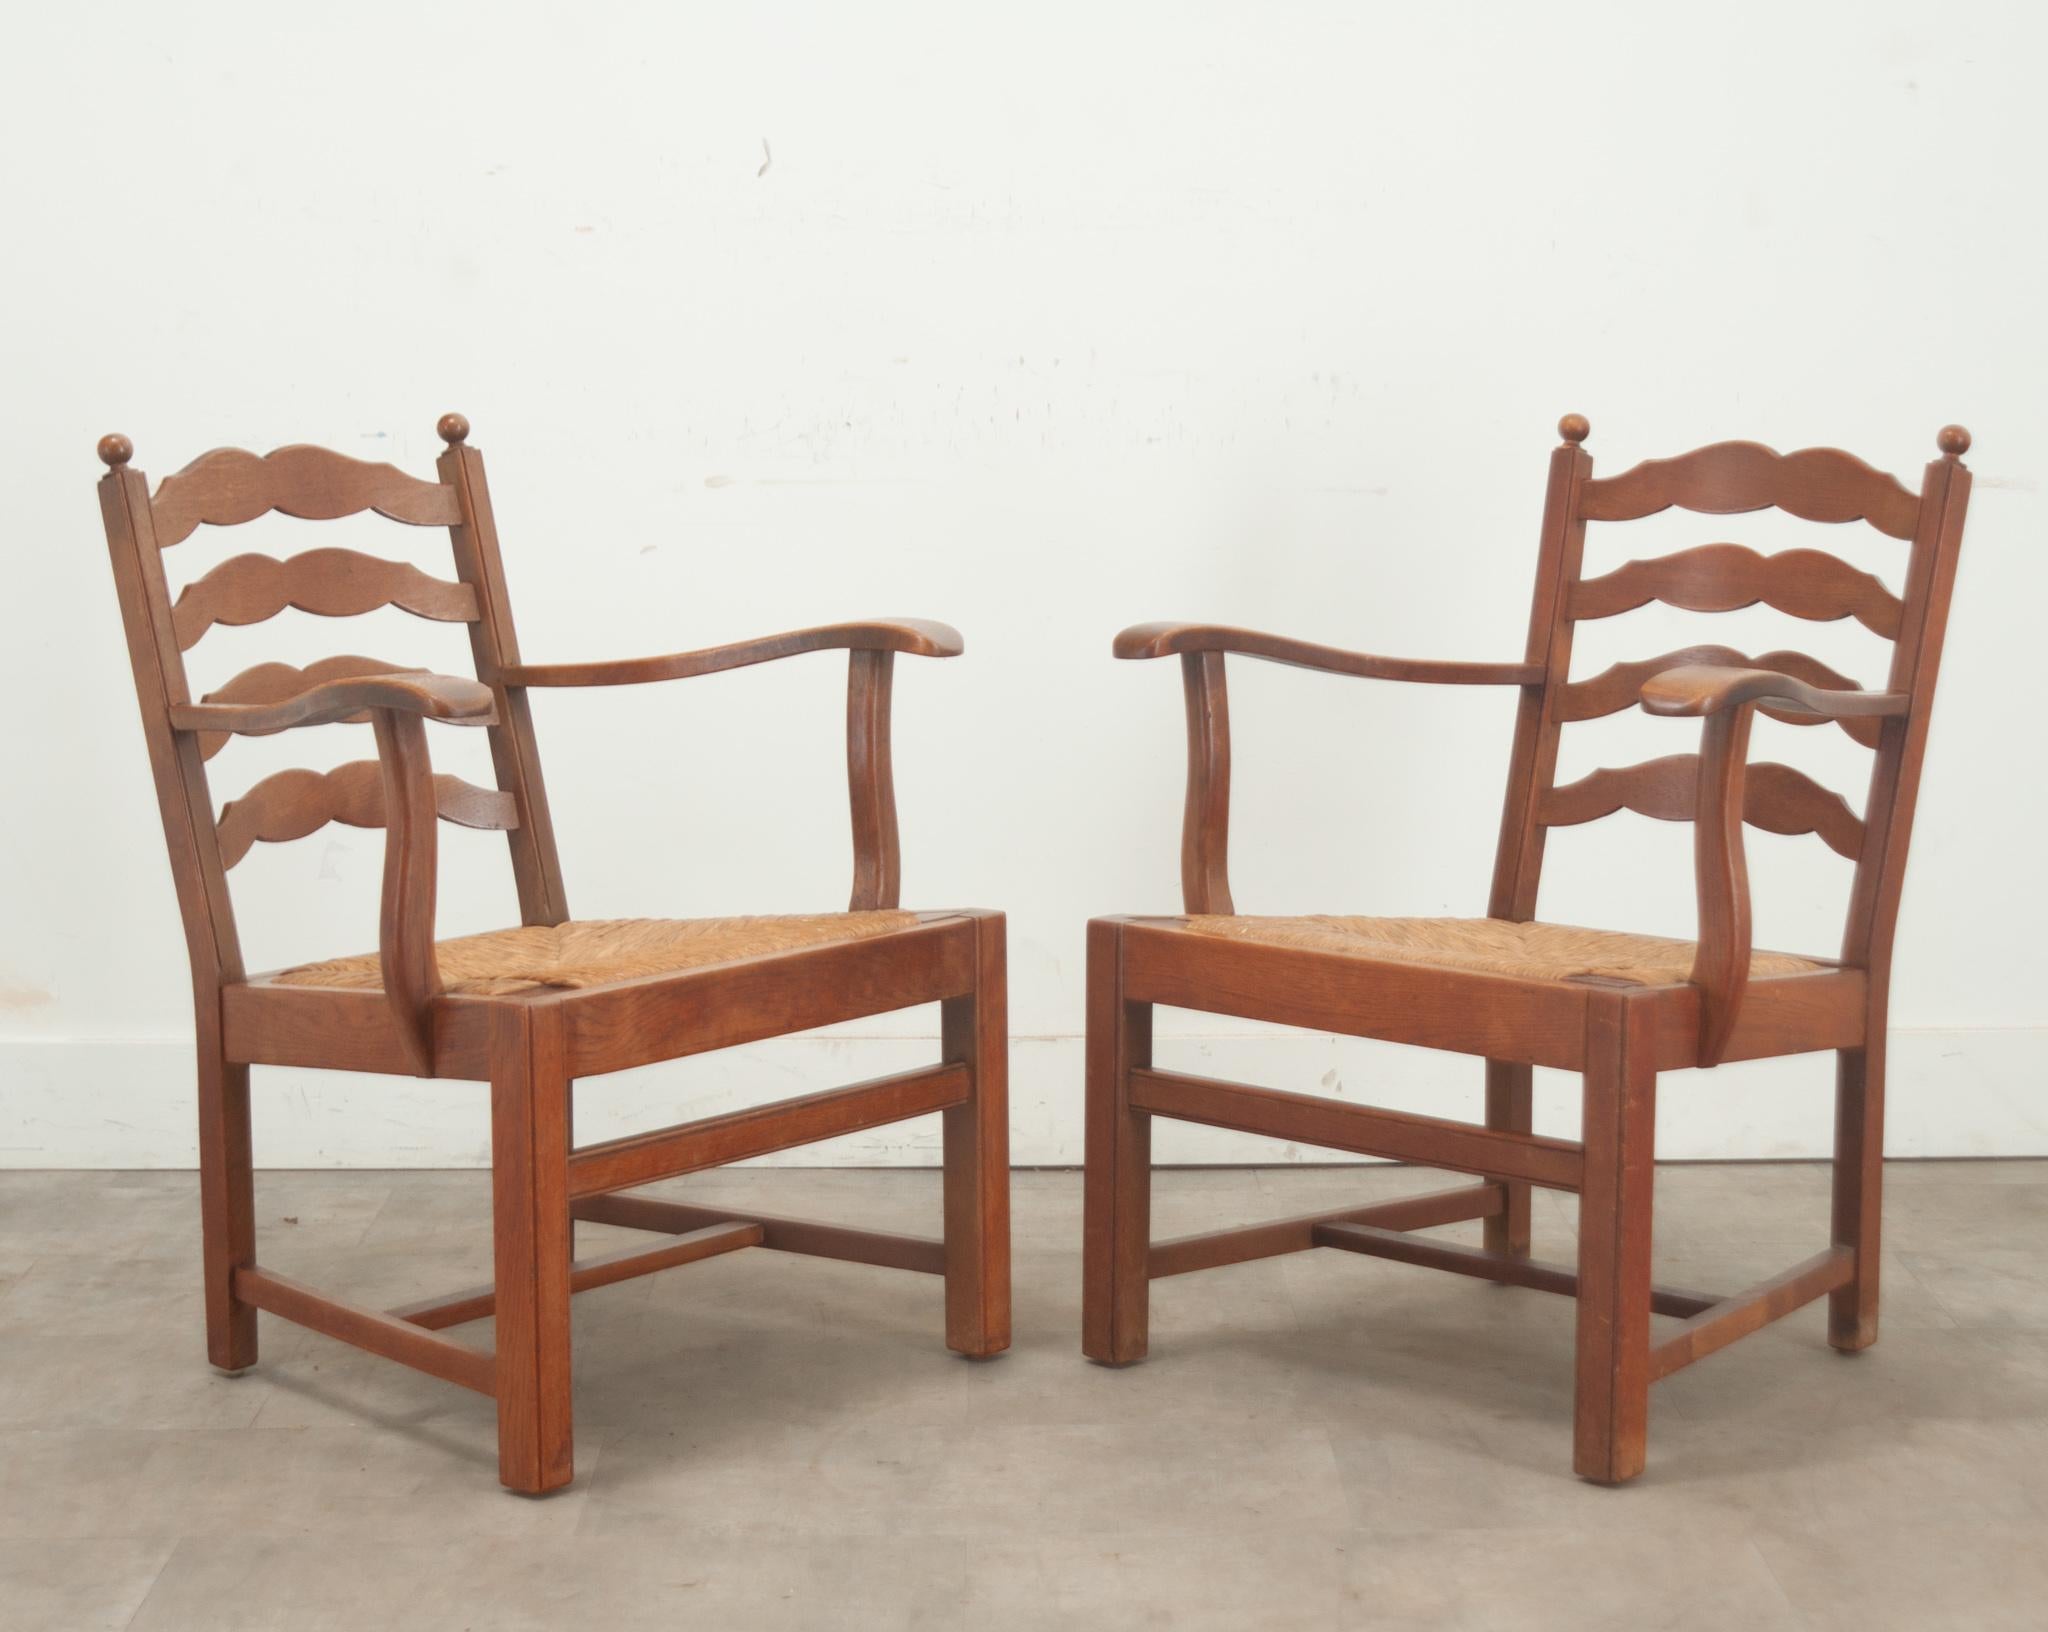 A comfortable set of solid oak and rush seat ladder back lounge chairs. This set of chairs are made of solid oak frames with scalloped ladder backs and long sloping arms. The rush seats are removable and the seat slopes back for a lounge like